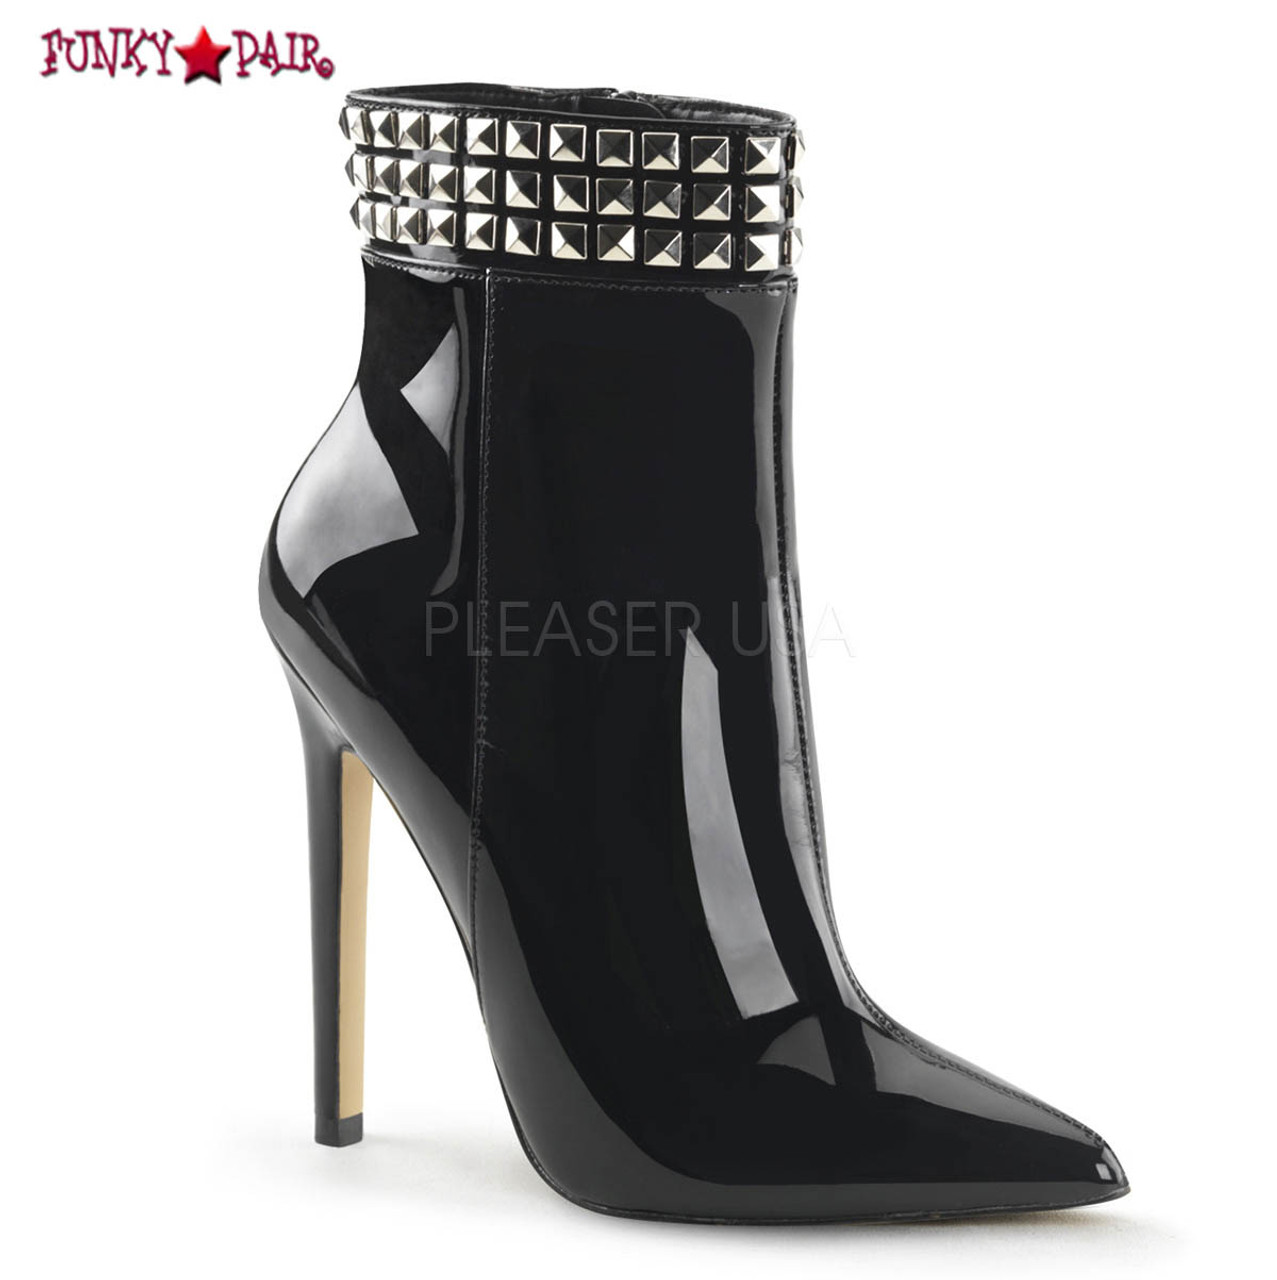 5 inch stiletto heel Ankle Boots